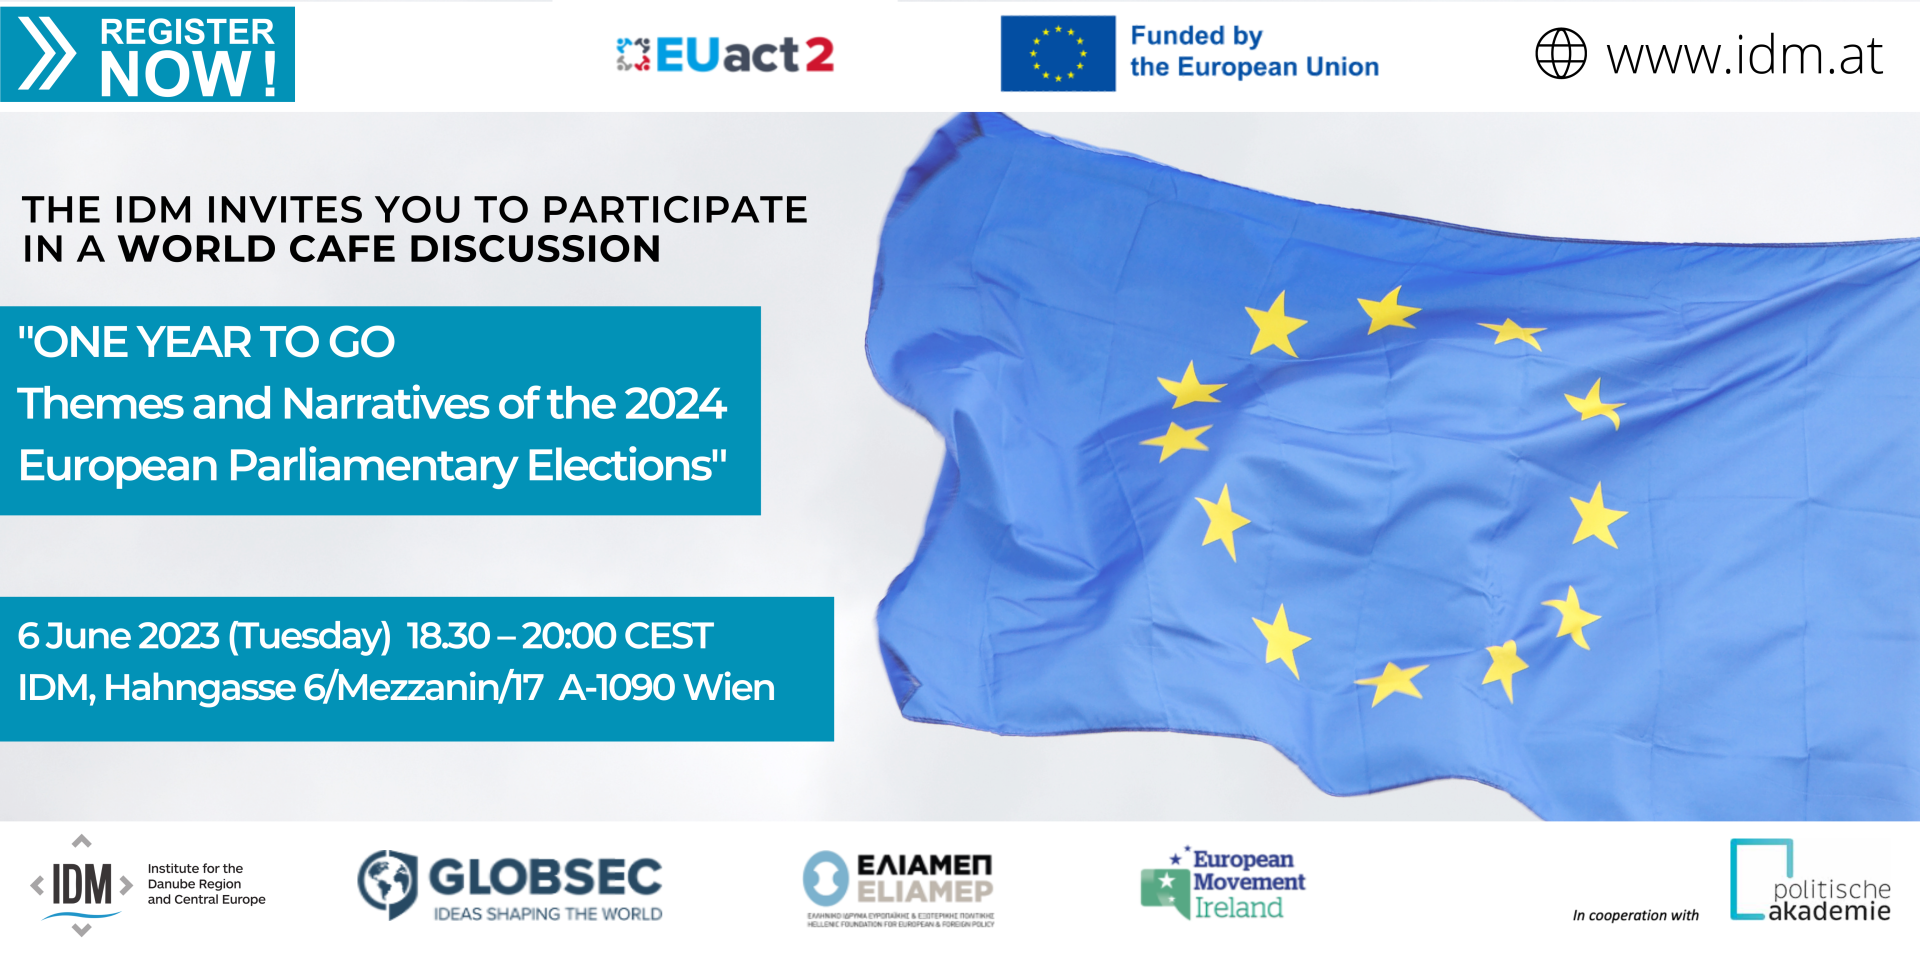 ONE YEAR TO GO European Parliamentary Elections 2024: What Themes and Narratives?